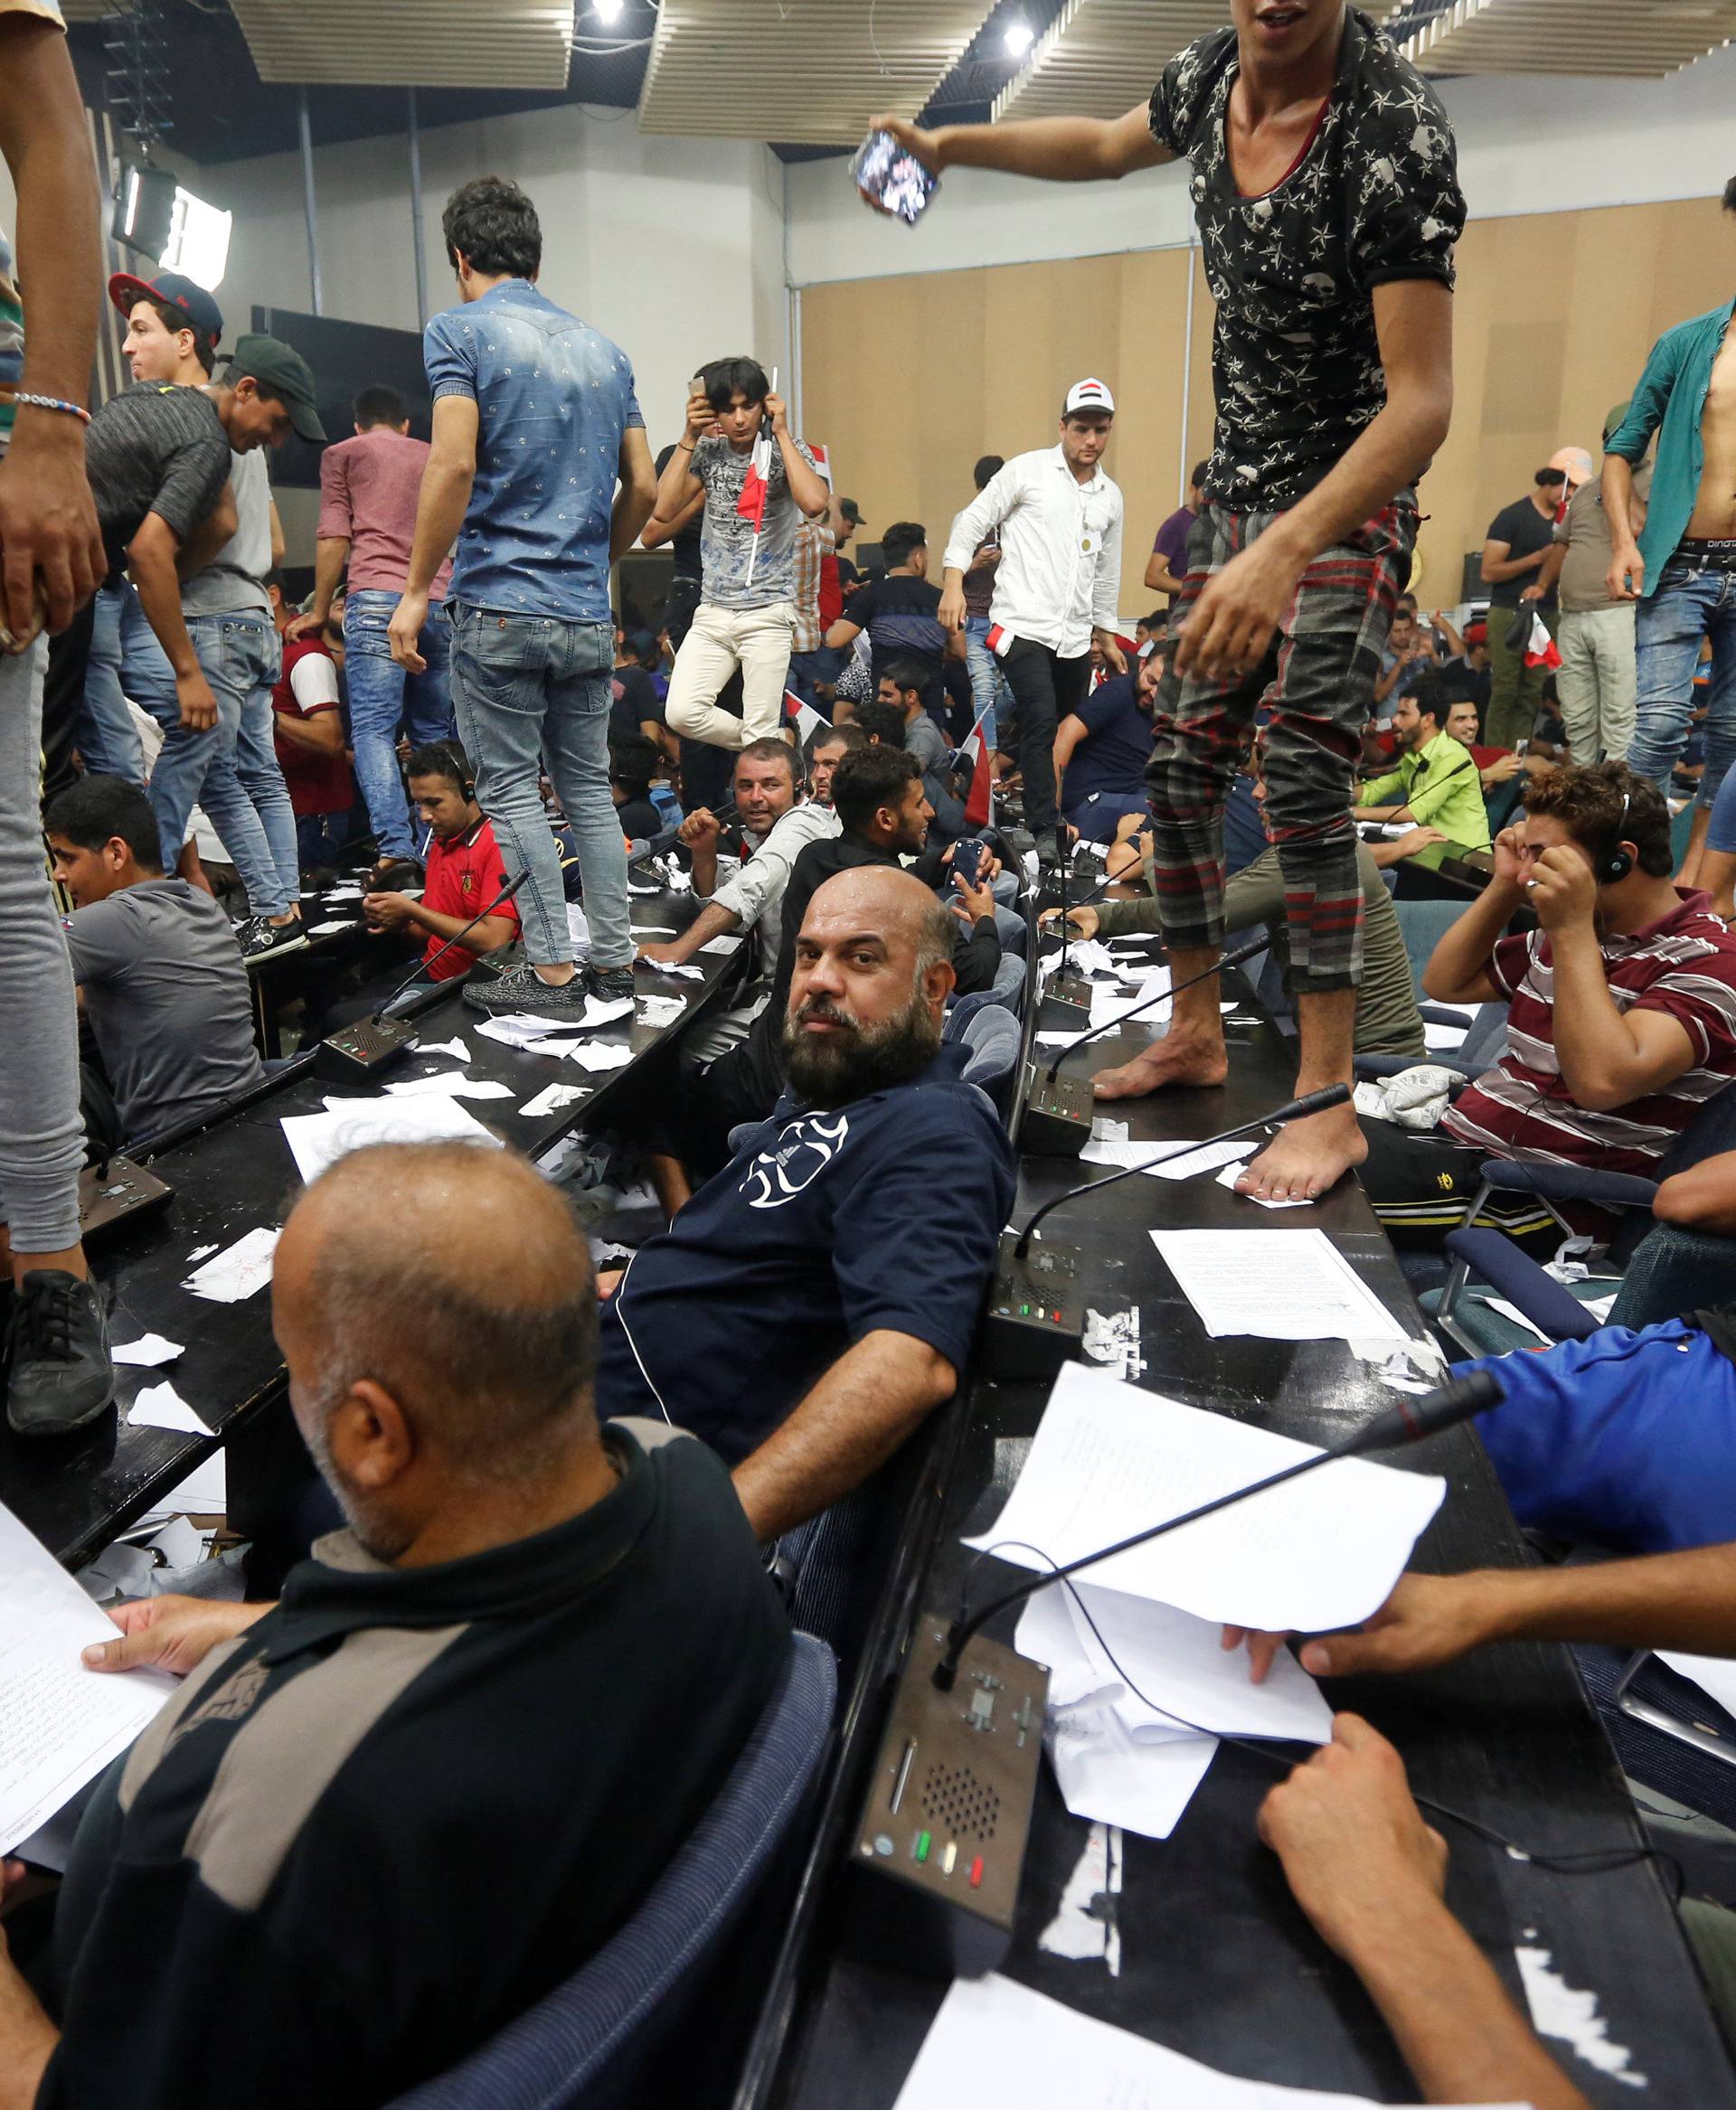 Followers of Iraq's Shi'ite cleric Moqtada al-Sadr are seen in the parliament building as they storm Baghdad's Green Zone after lawmakers failed to convene for a vote on overhauling the government, in Iraq